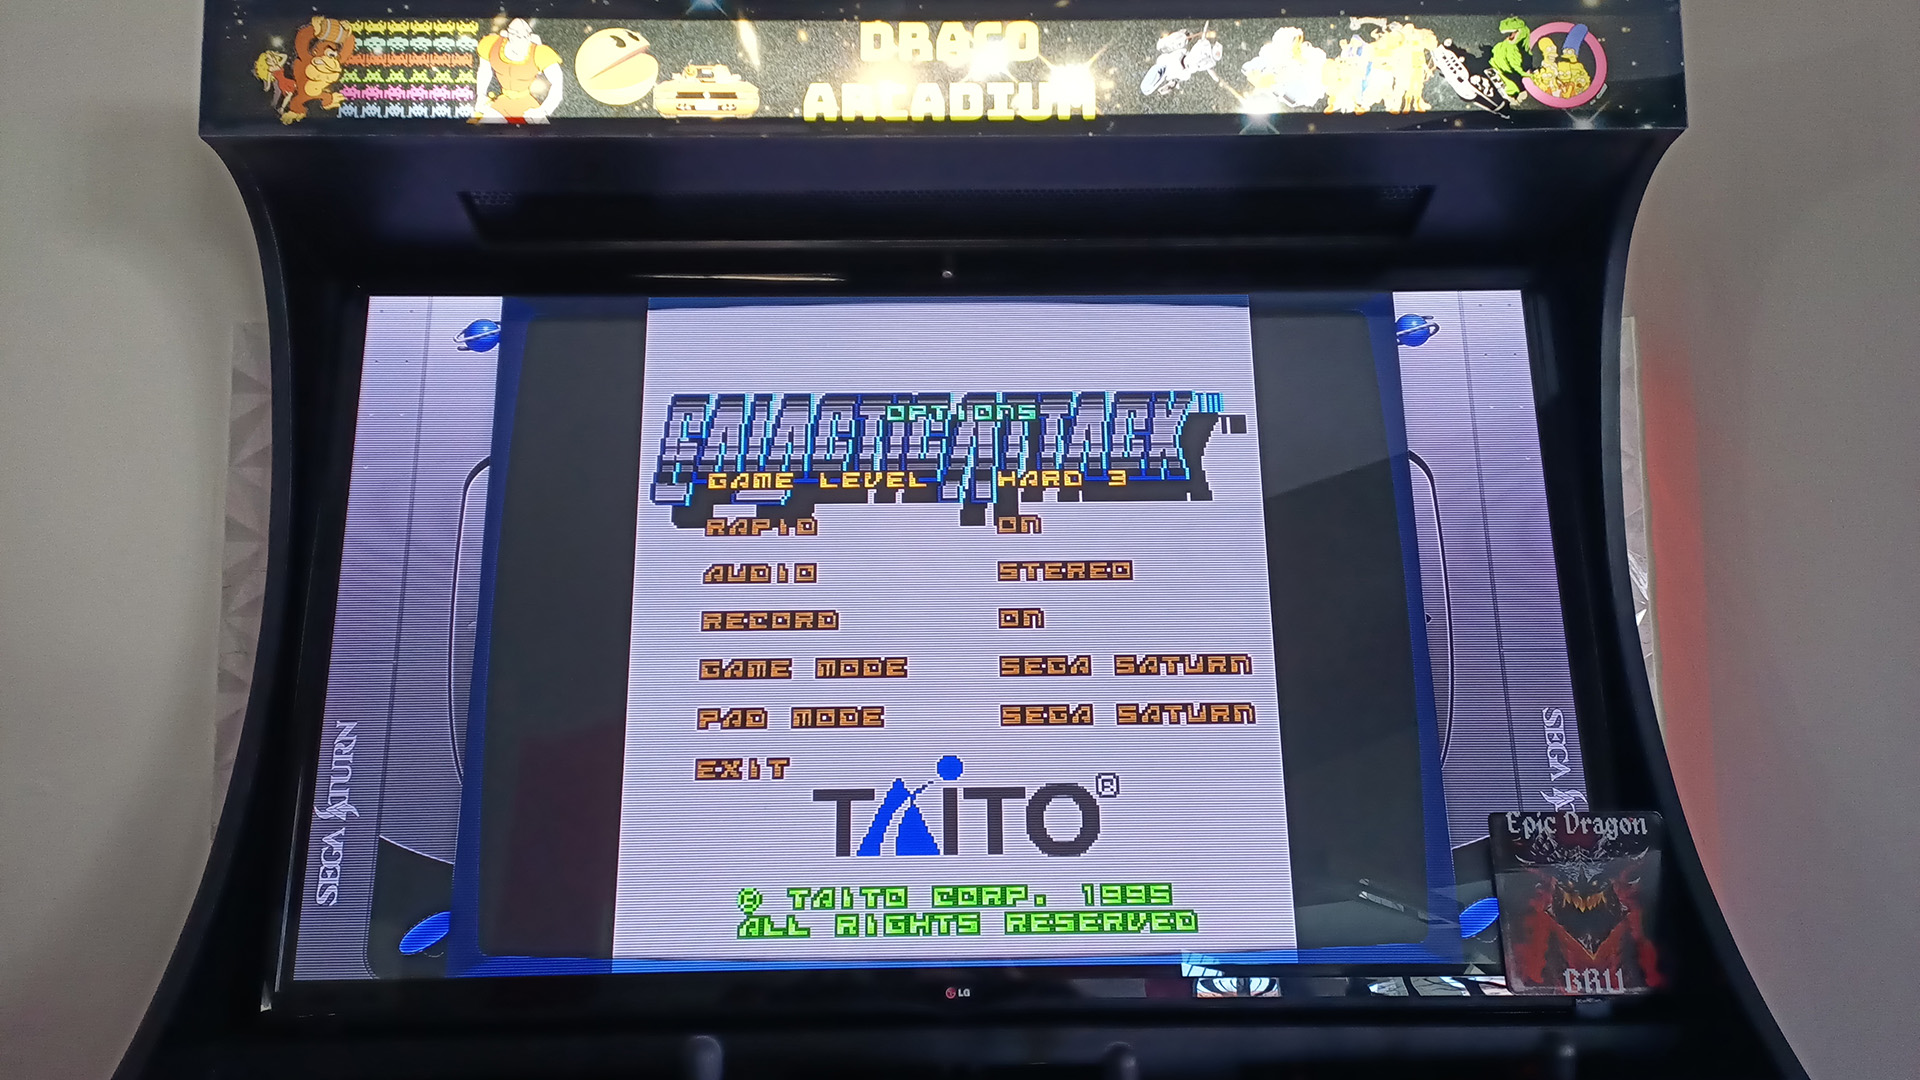 EpicDragon: Galactic Attack: Hard 3 (Sega Saturn Emulated) 523,300 points on 2022-08-14 14:49:47